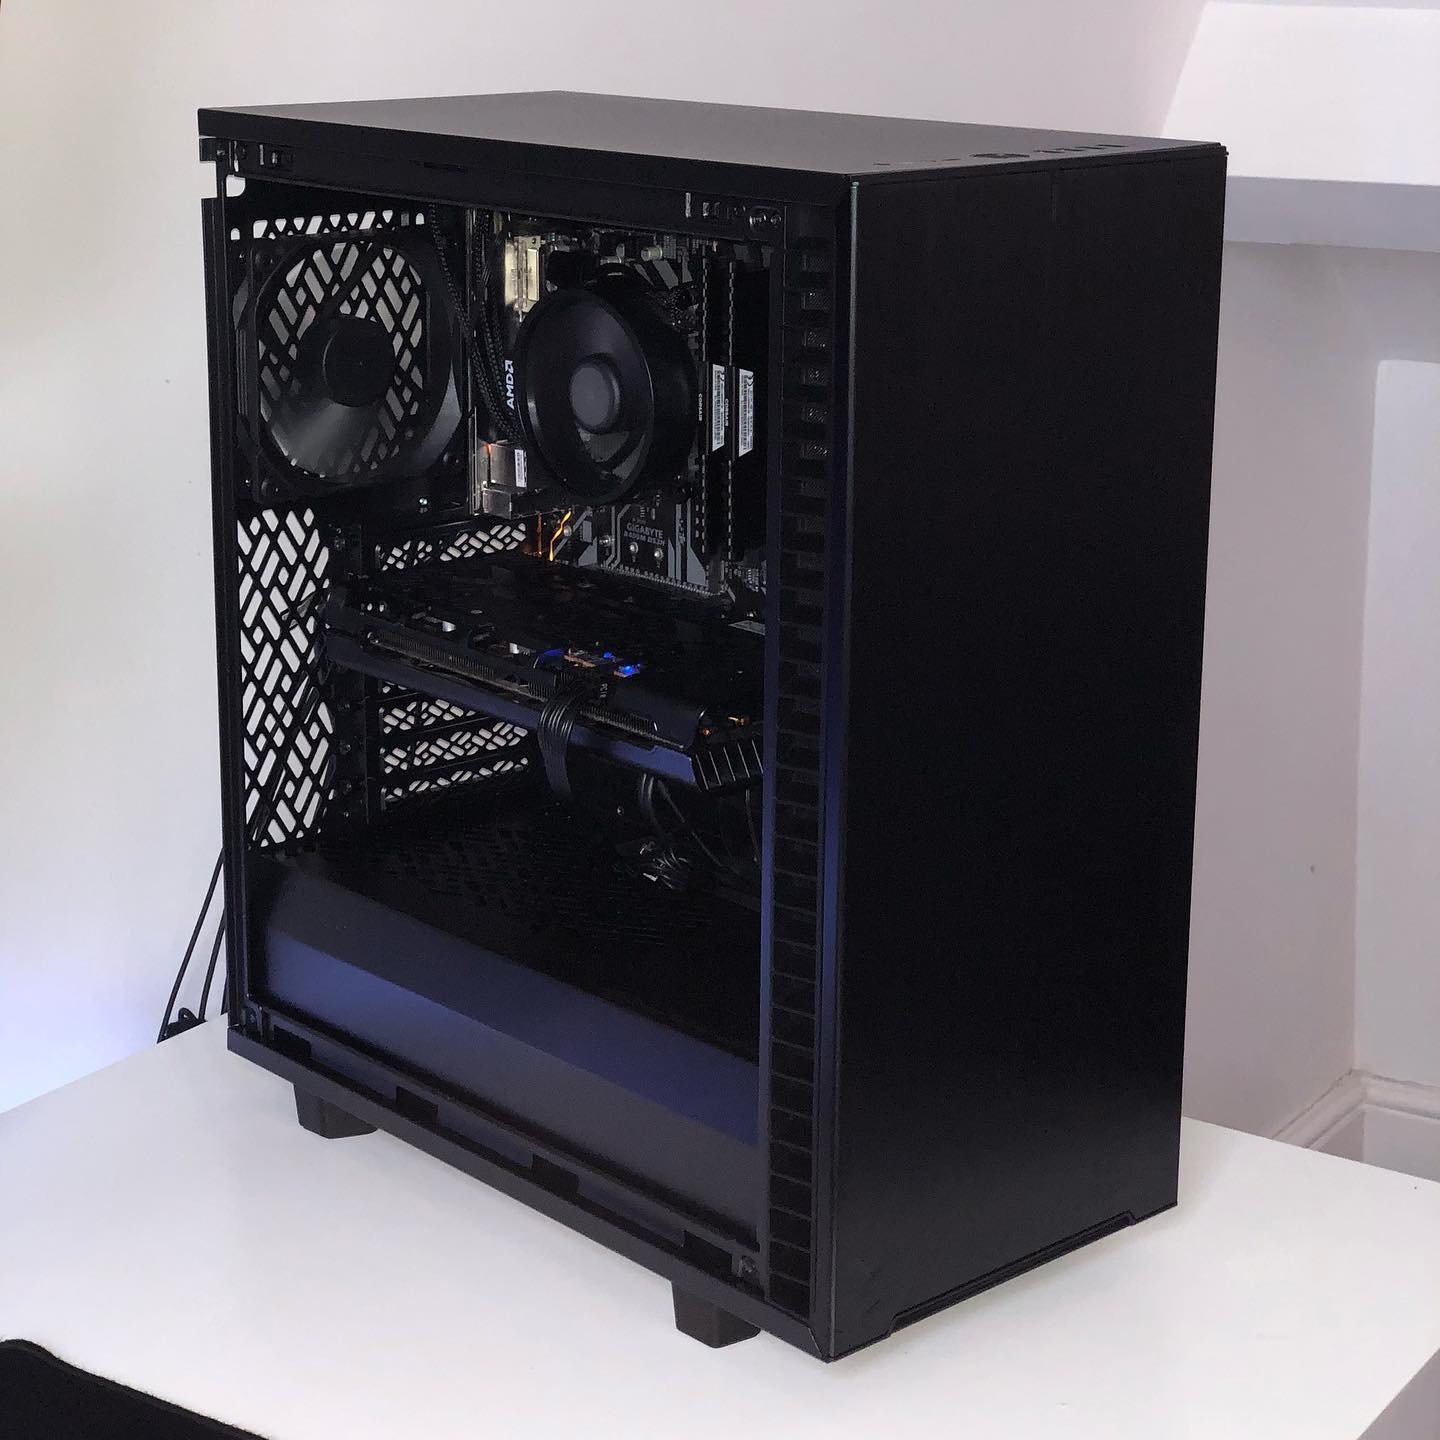 One of our personal rigs transfered to Fractal Design's Define 7 Case 🤩🔥 @fractaldesignna 

Need a high performance PC building, an upgrade, or a PC repair? DM us and we'll be happy to help 😁
#pcgaming #fractaldesign #pcbuild #computersetup #pcset